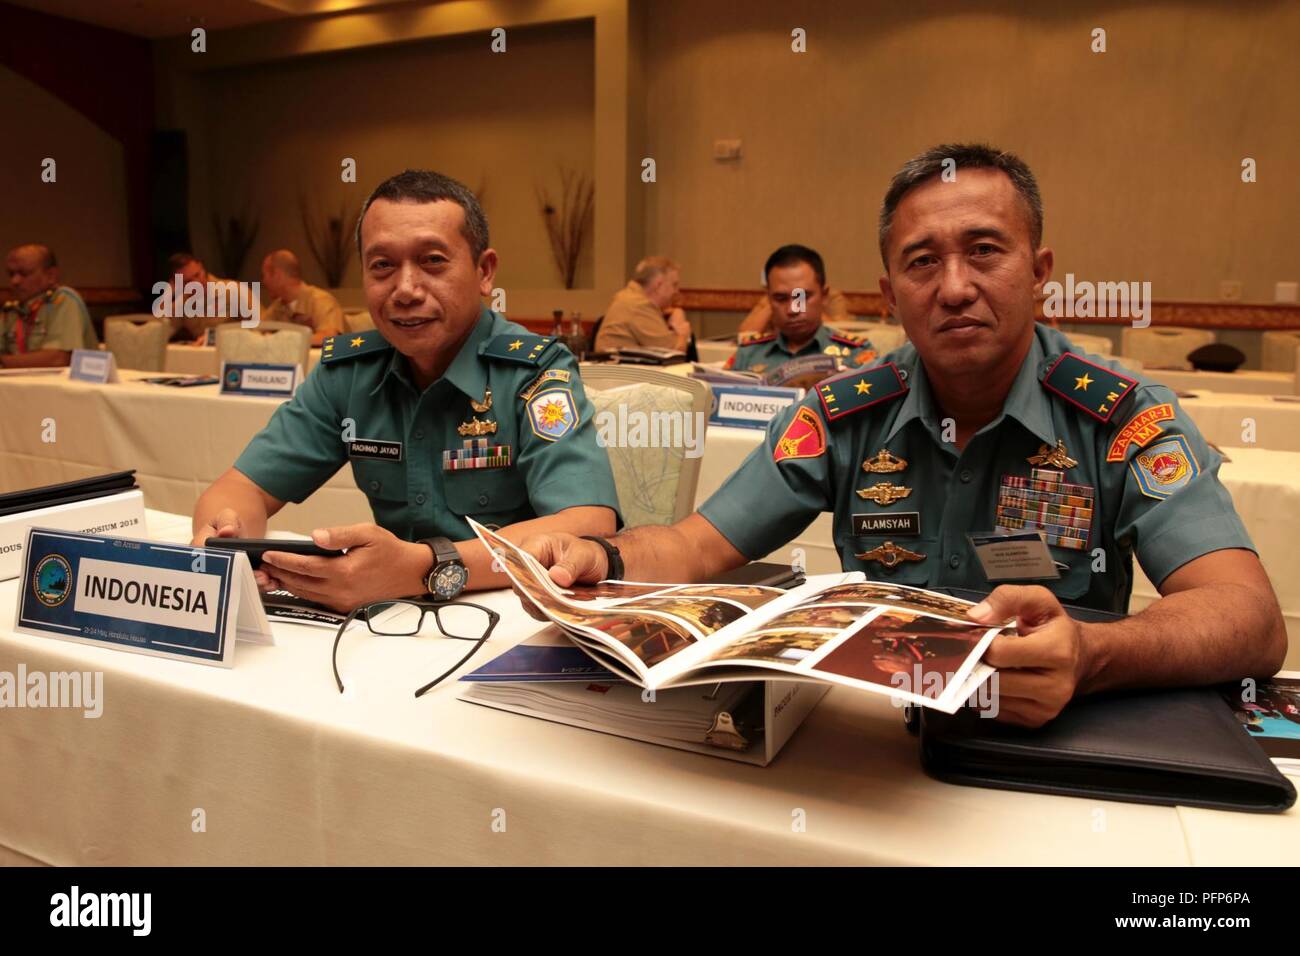 Indonesian Marine Corps Brig. Gen. Nur Alamsyah, left, 2nd Marine Force Commander, Indonesian Marine Corps and Indonesian Navy First Adm. Rachmad Jayadi, commander, Sea Battle Task Force, Eastern Fleet Command, look over the Pacific Amphibious Leaders Symposium (PALS) photo book during PALS in Honolulu, Hawaii, on May 24, 2018. PALS brings together senior leaders of allied and partner militaries with significant interest in the security and stability of the Indo-Pacific region to discuss key aspects of maritime/amphibious operations, capability development, crisis response and interoperability Stock Photo